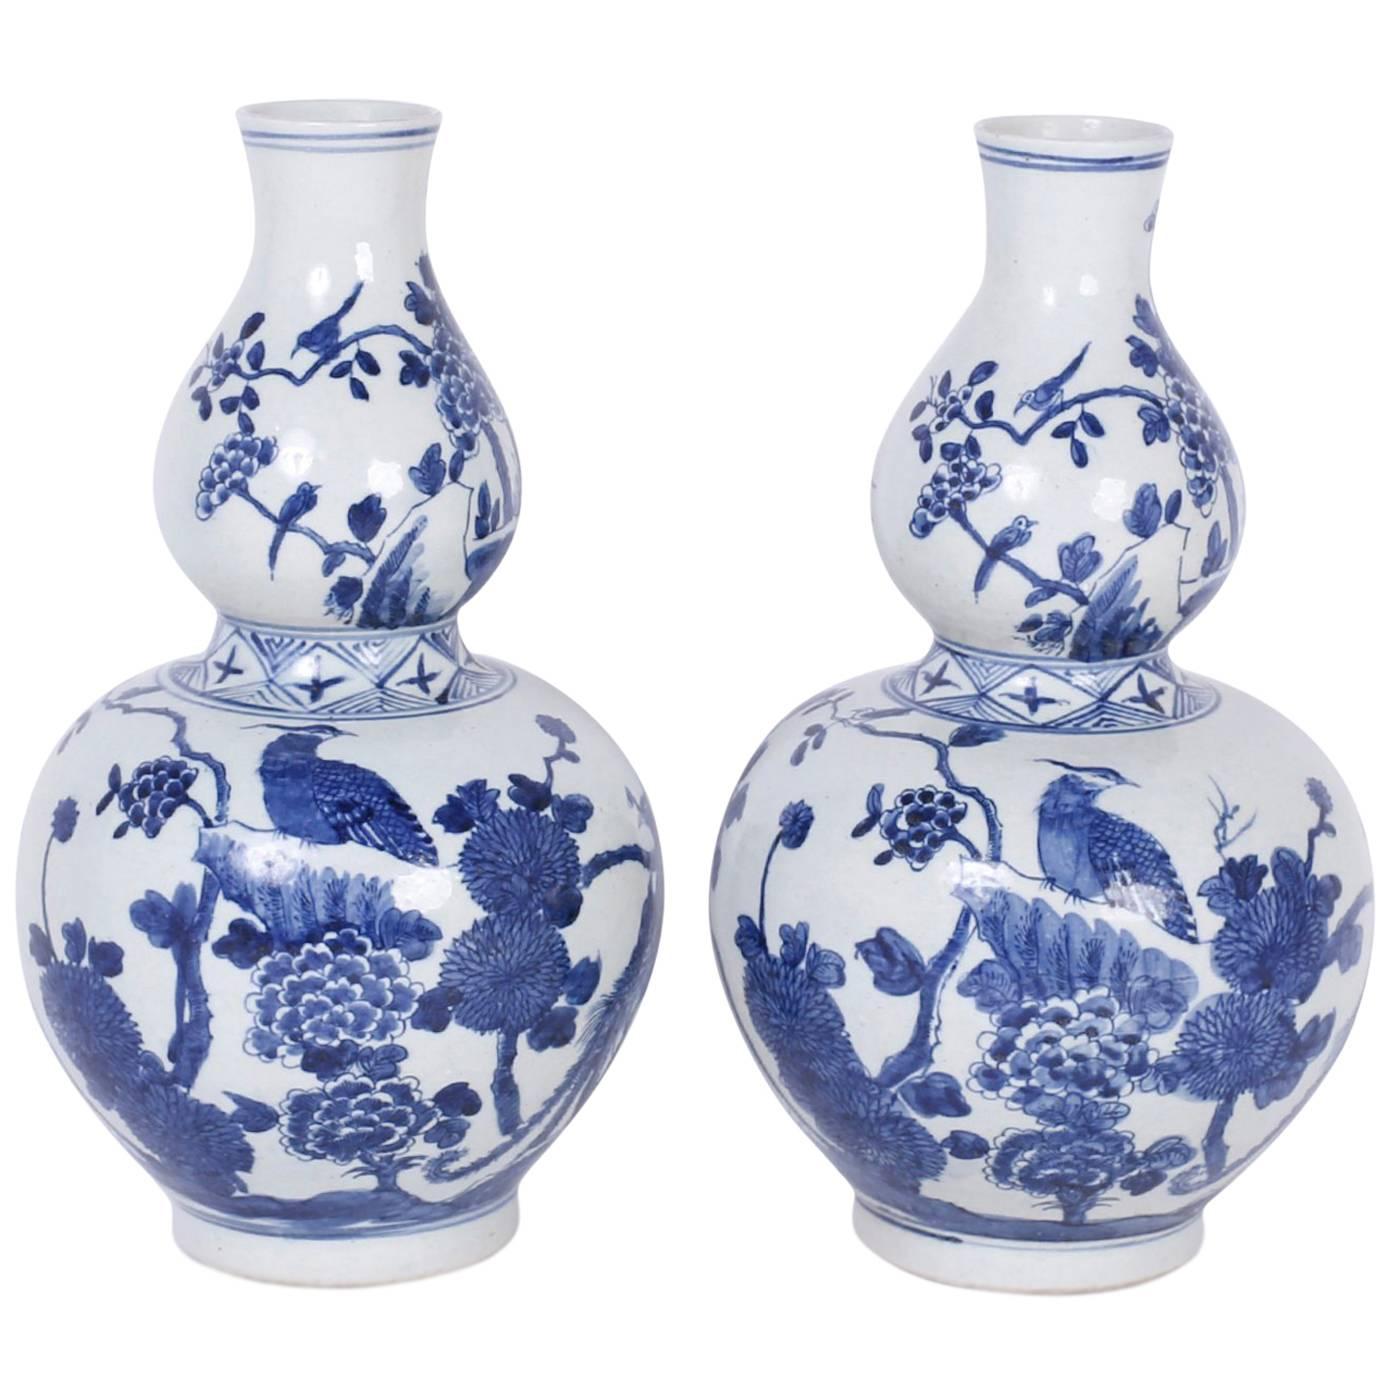 Pair of Blue and White Double Gourd Vases